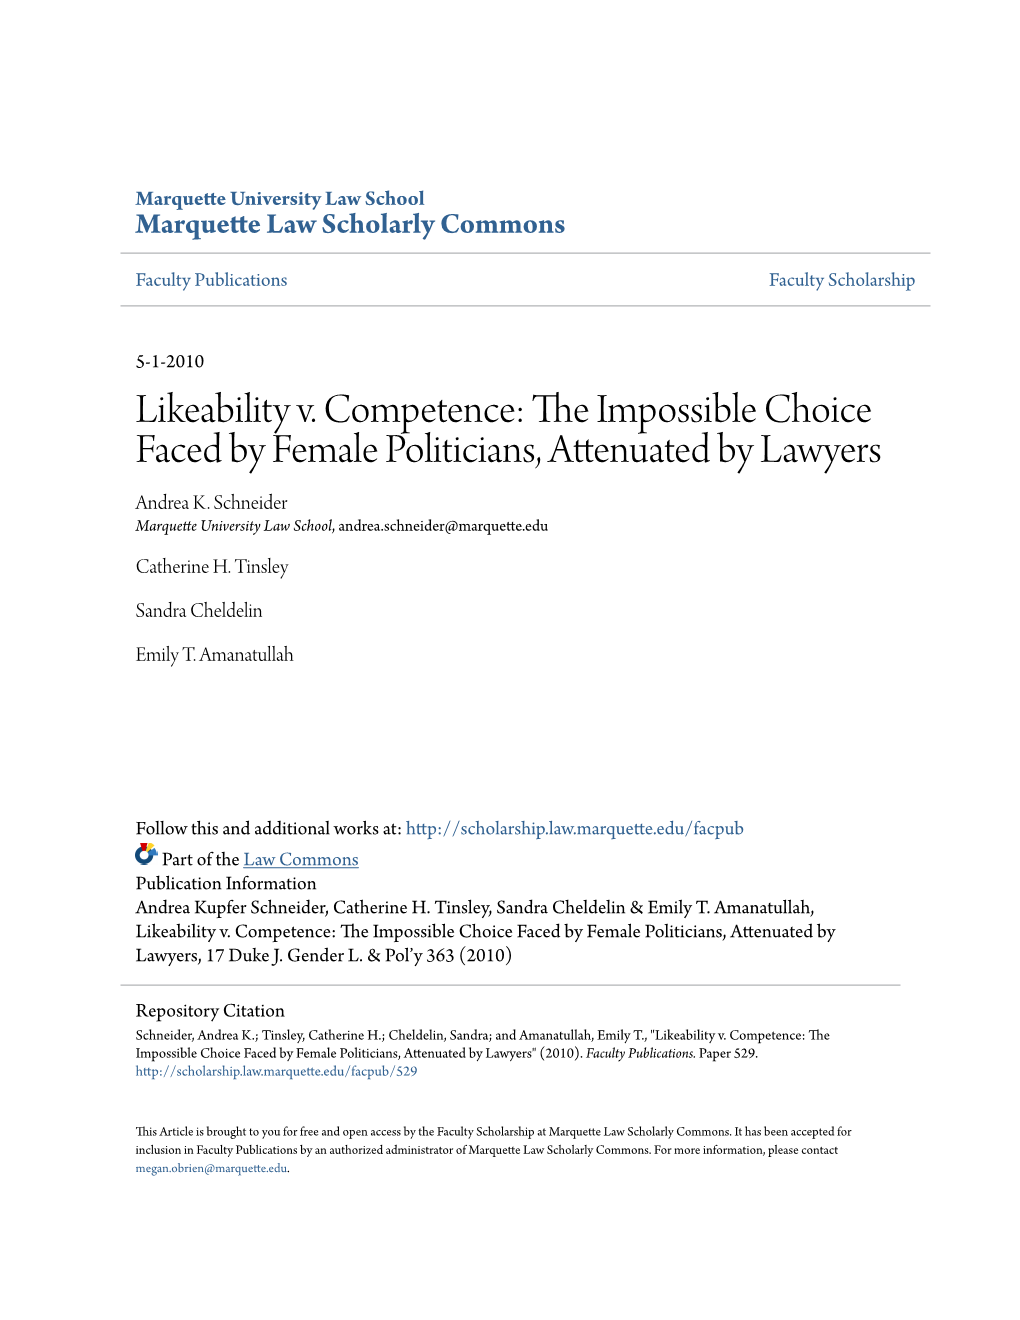 Likeability V. Competence: the Impossible Choice Faced by Female Politicians, Attenuated by Lawyers" (2010)